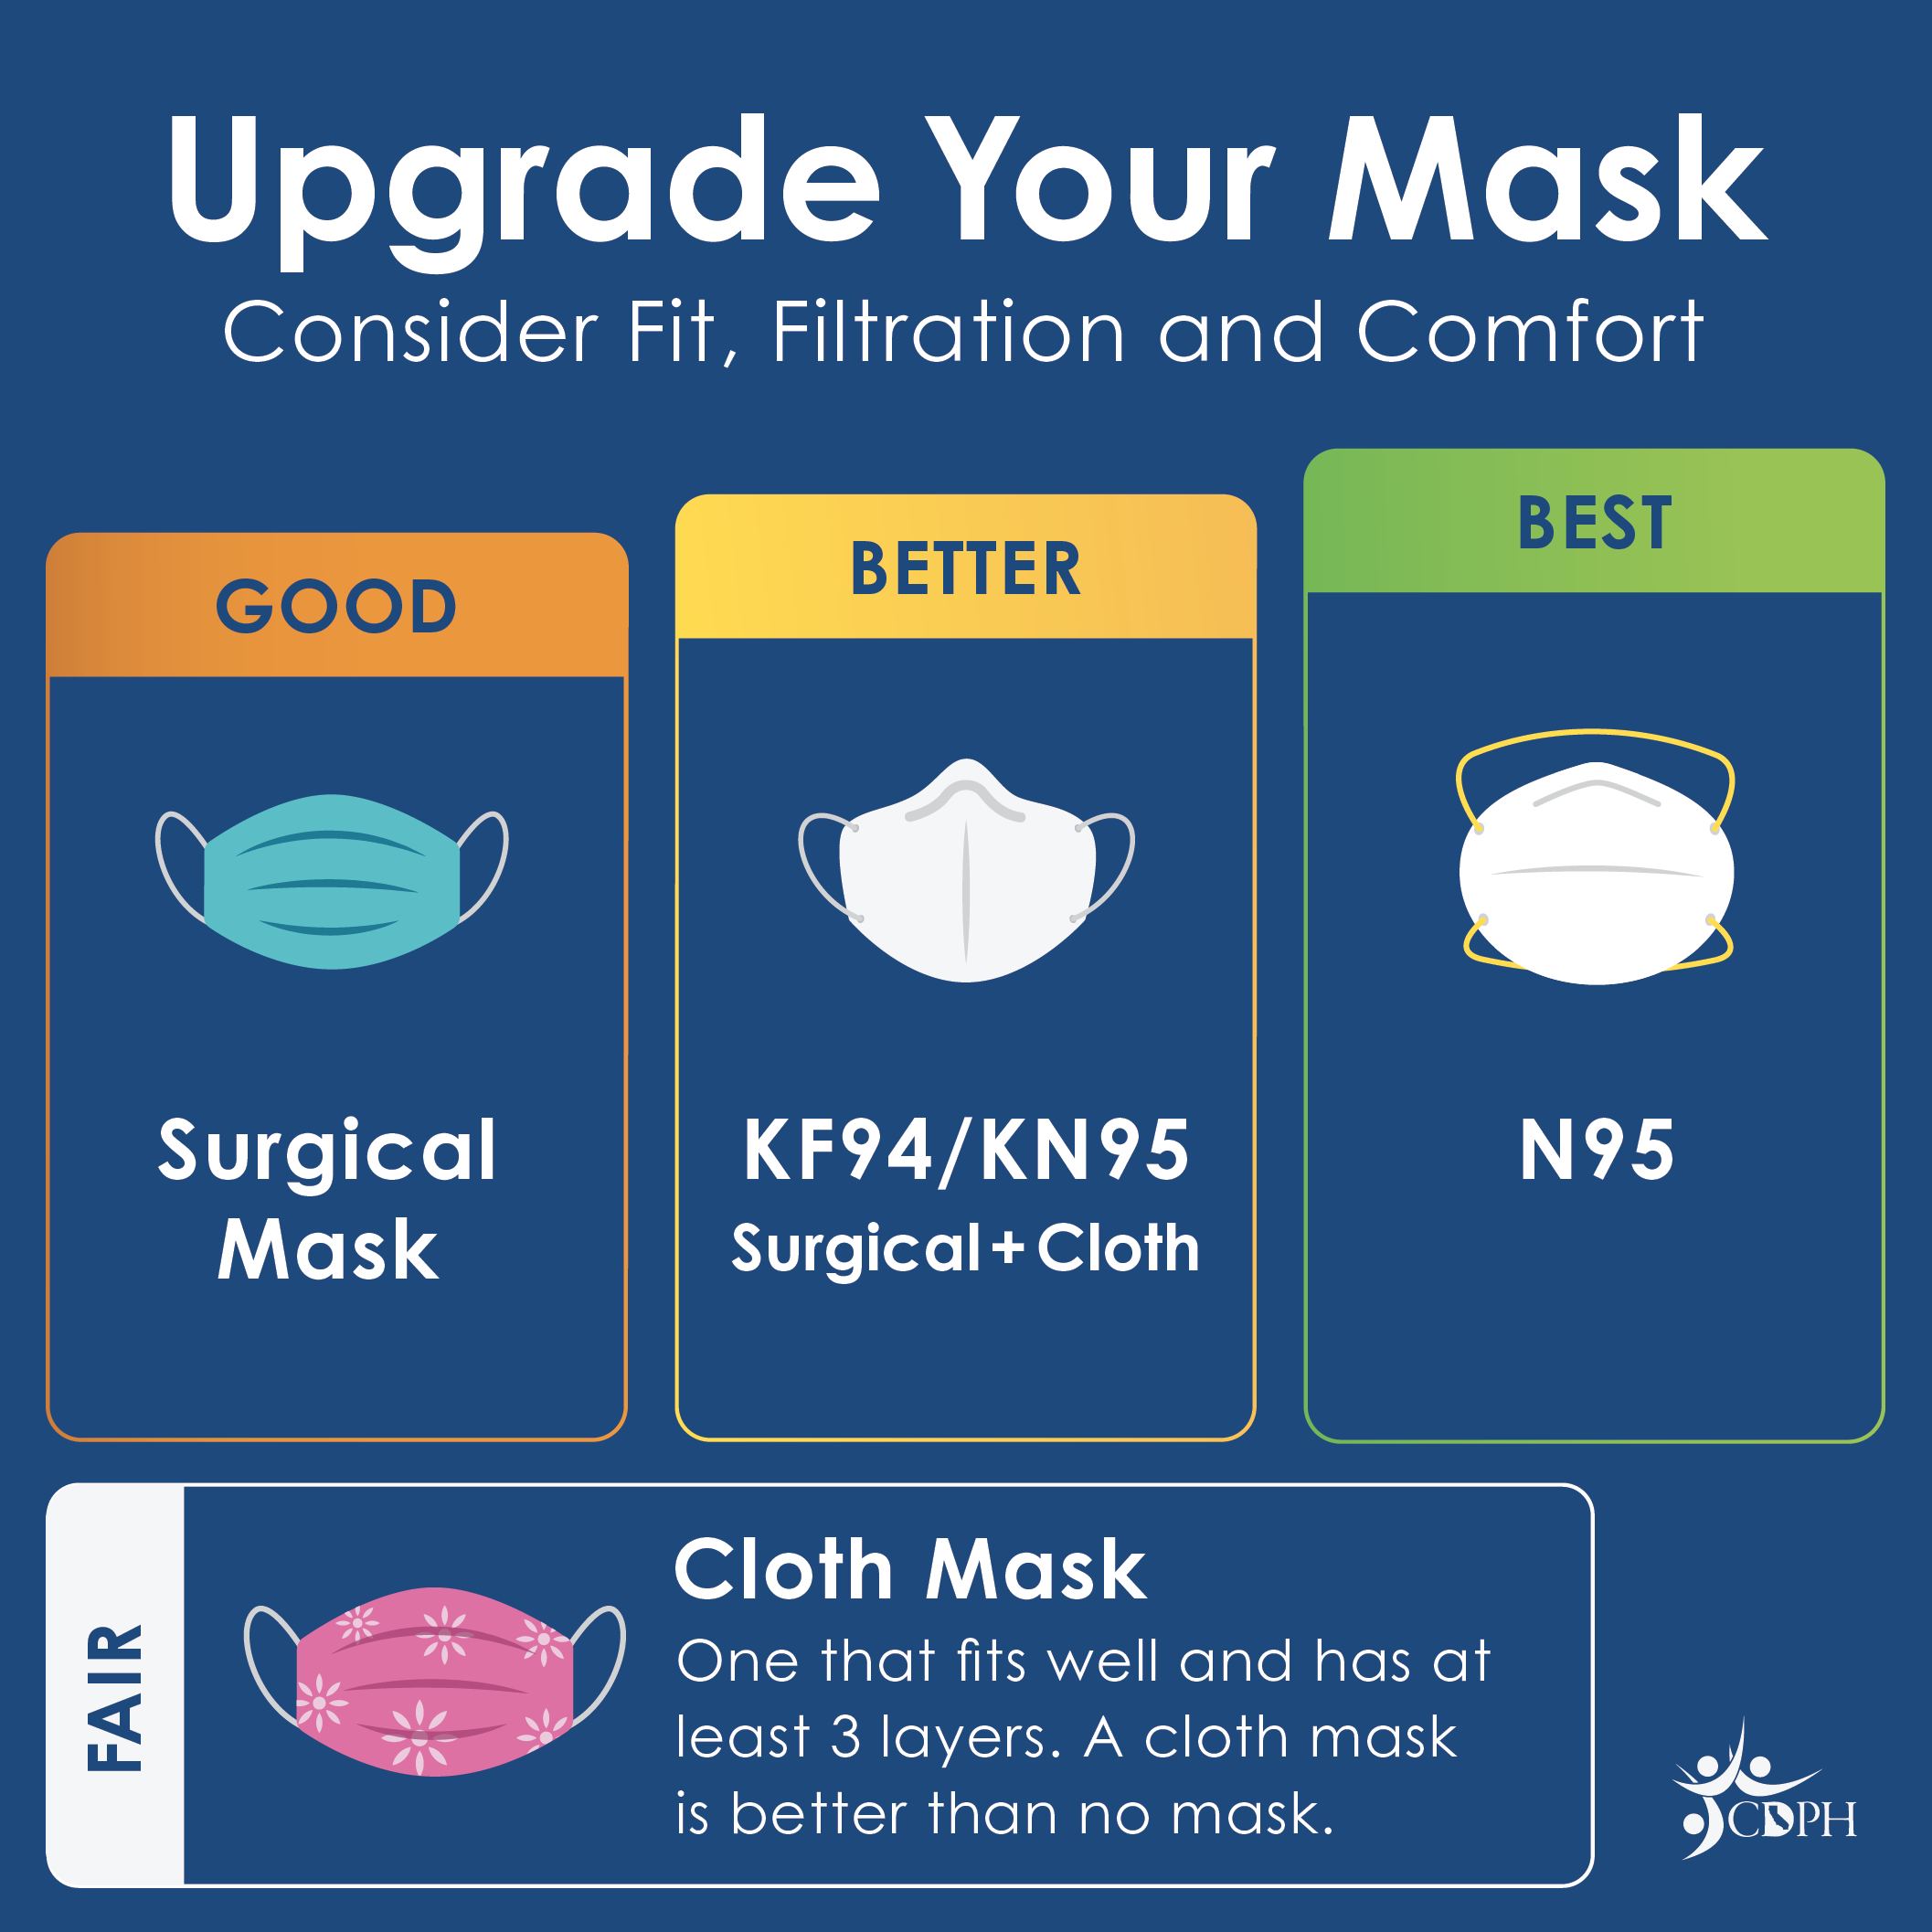 Best mask is N95. Next level is KF95, KN95, fitted surgical masks, and double masks. Surgical masks are better than cloth mask